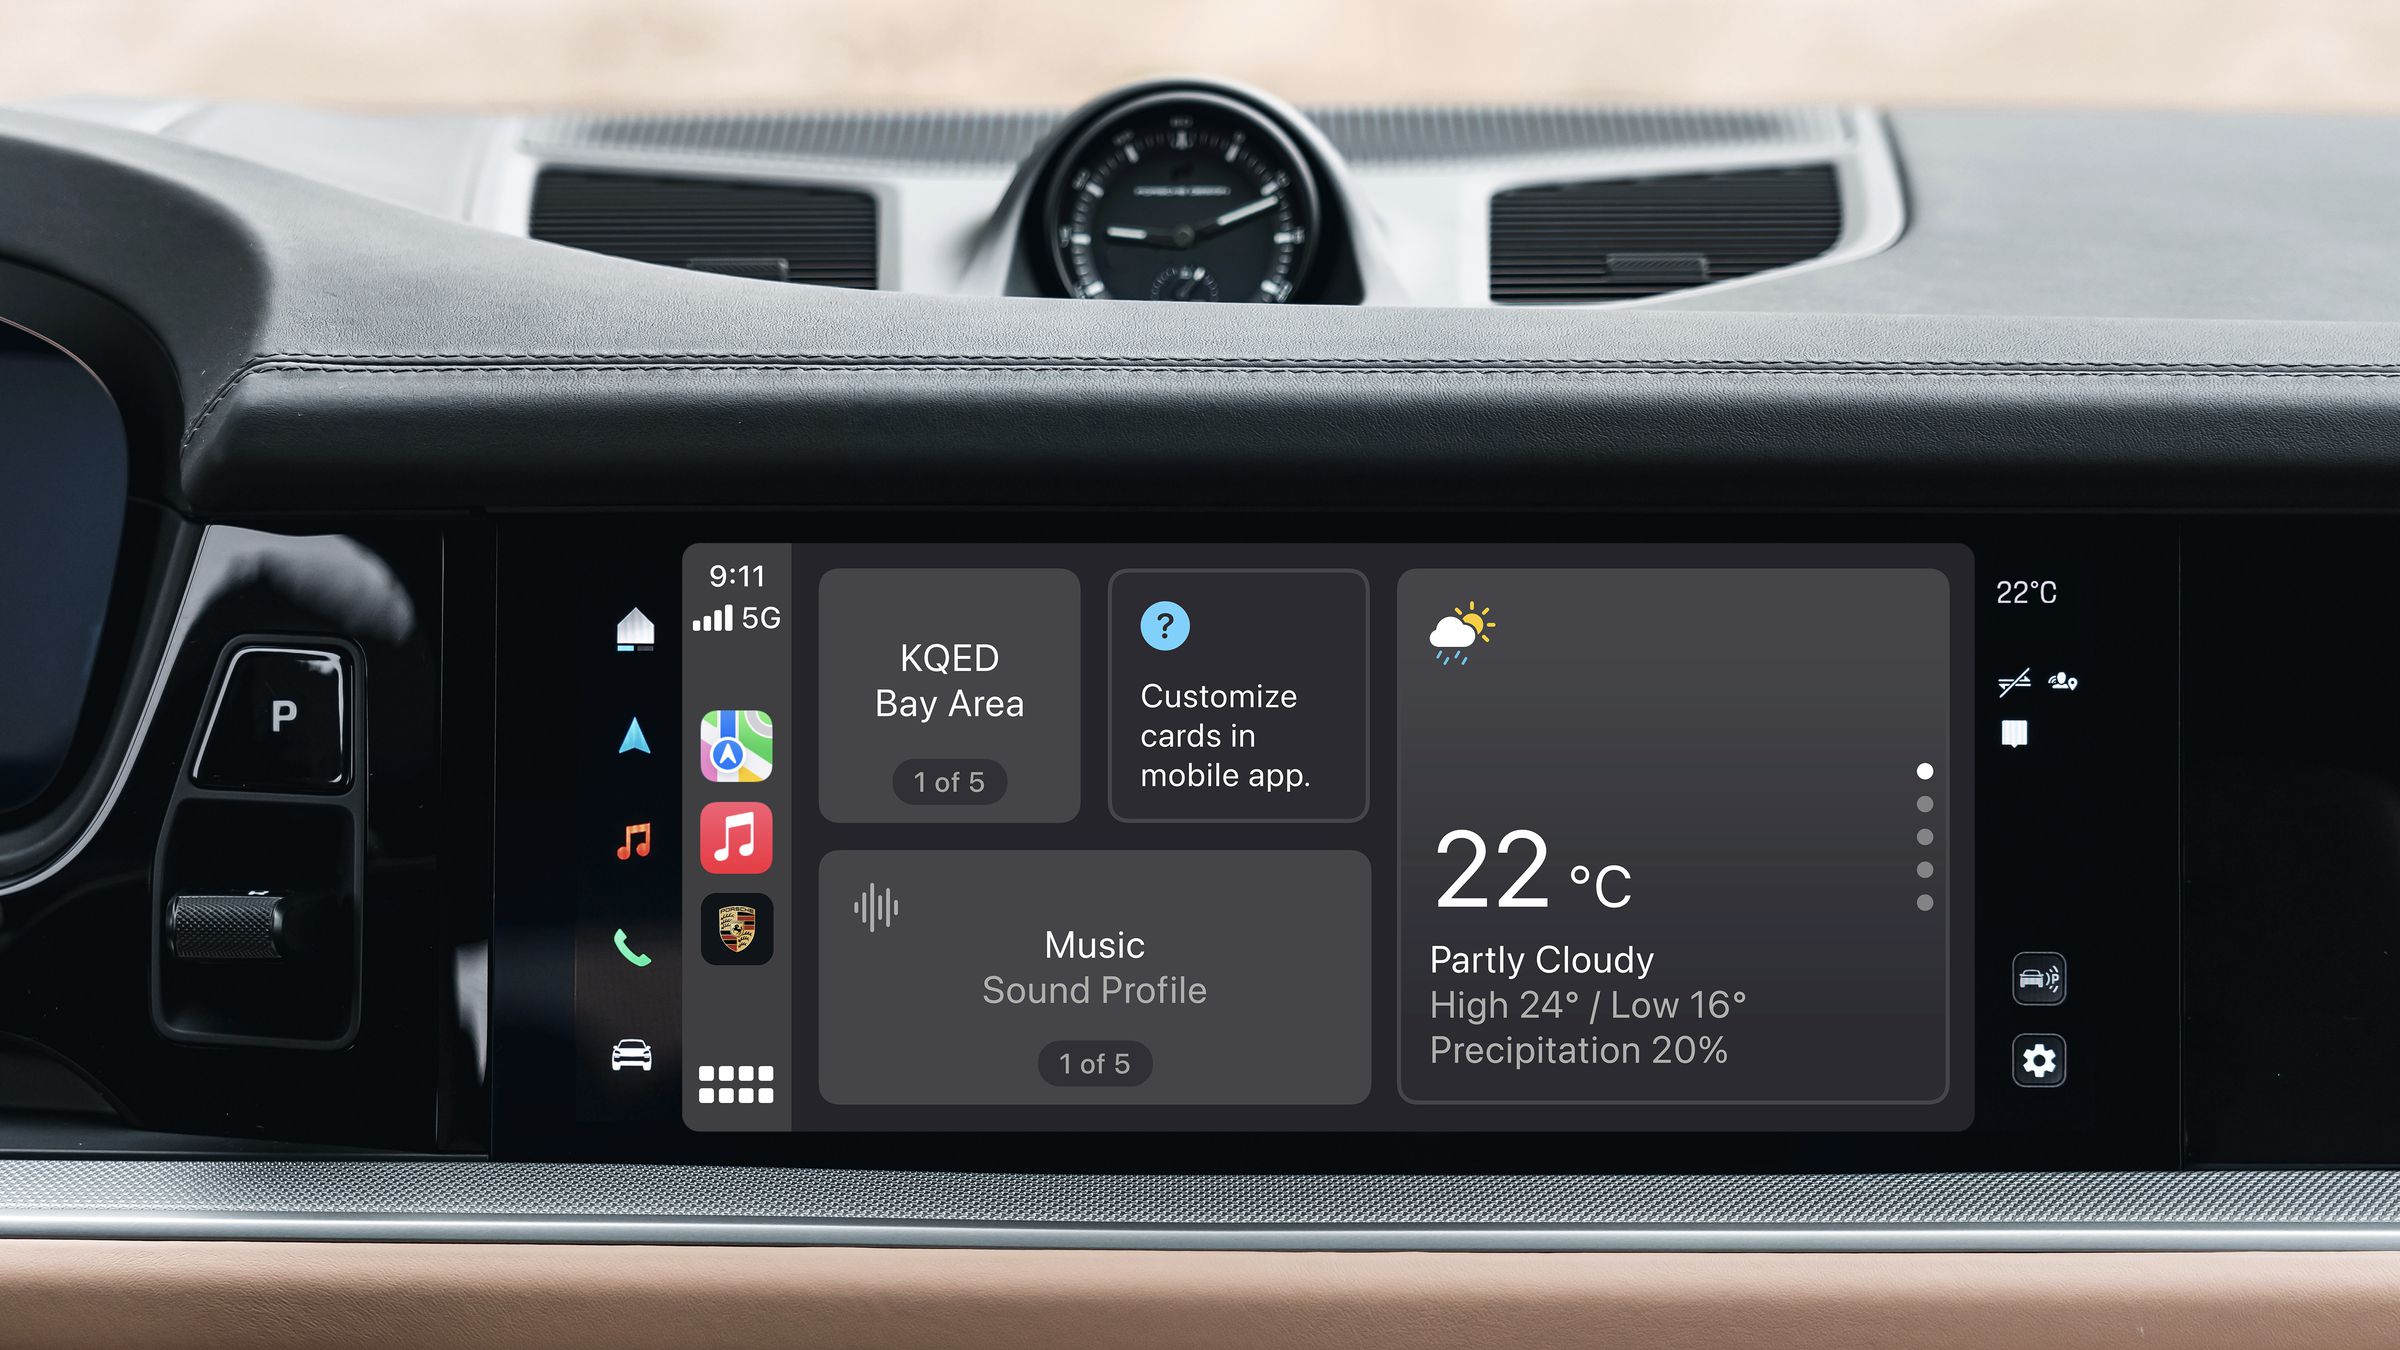 CarPlay interface in a porsche cayanne showing a weather widget alongside a music profiles switcher.